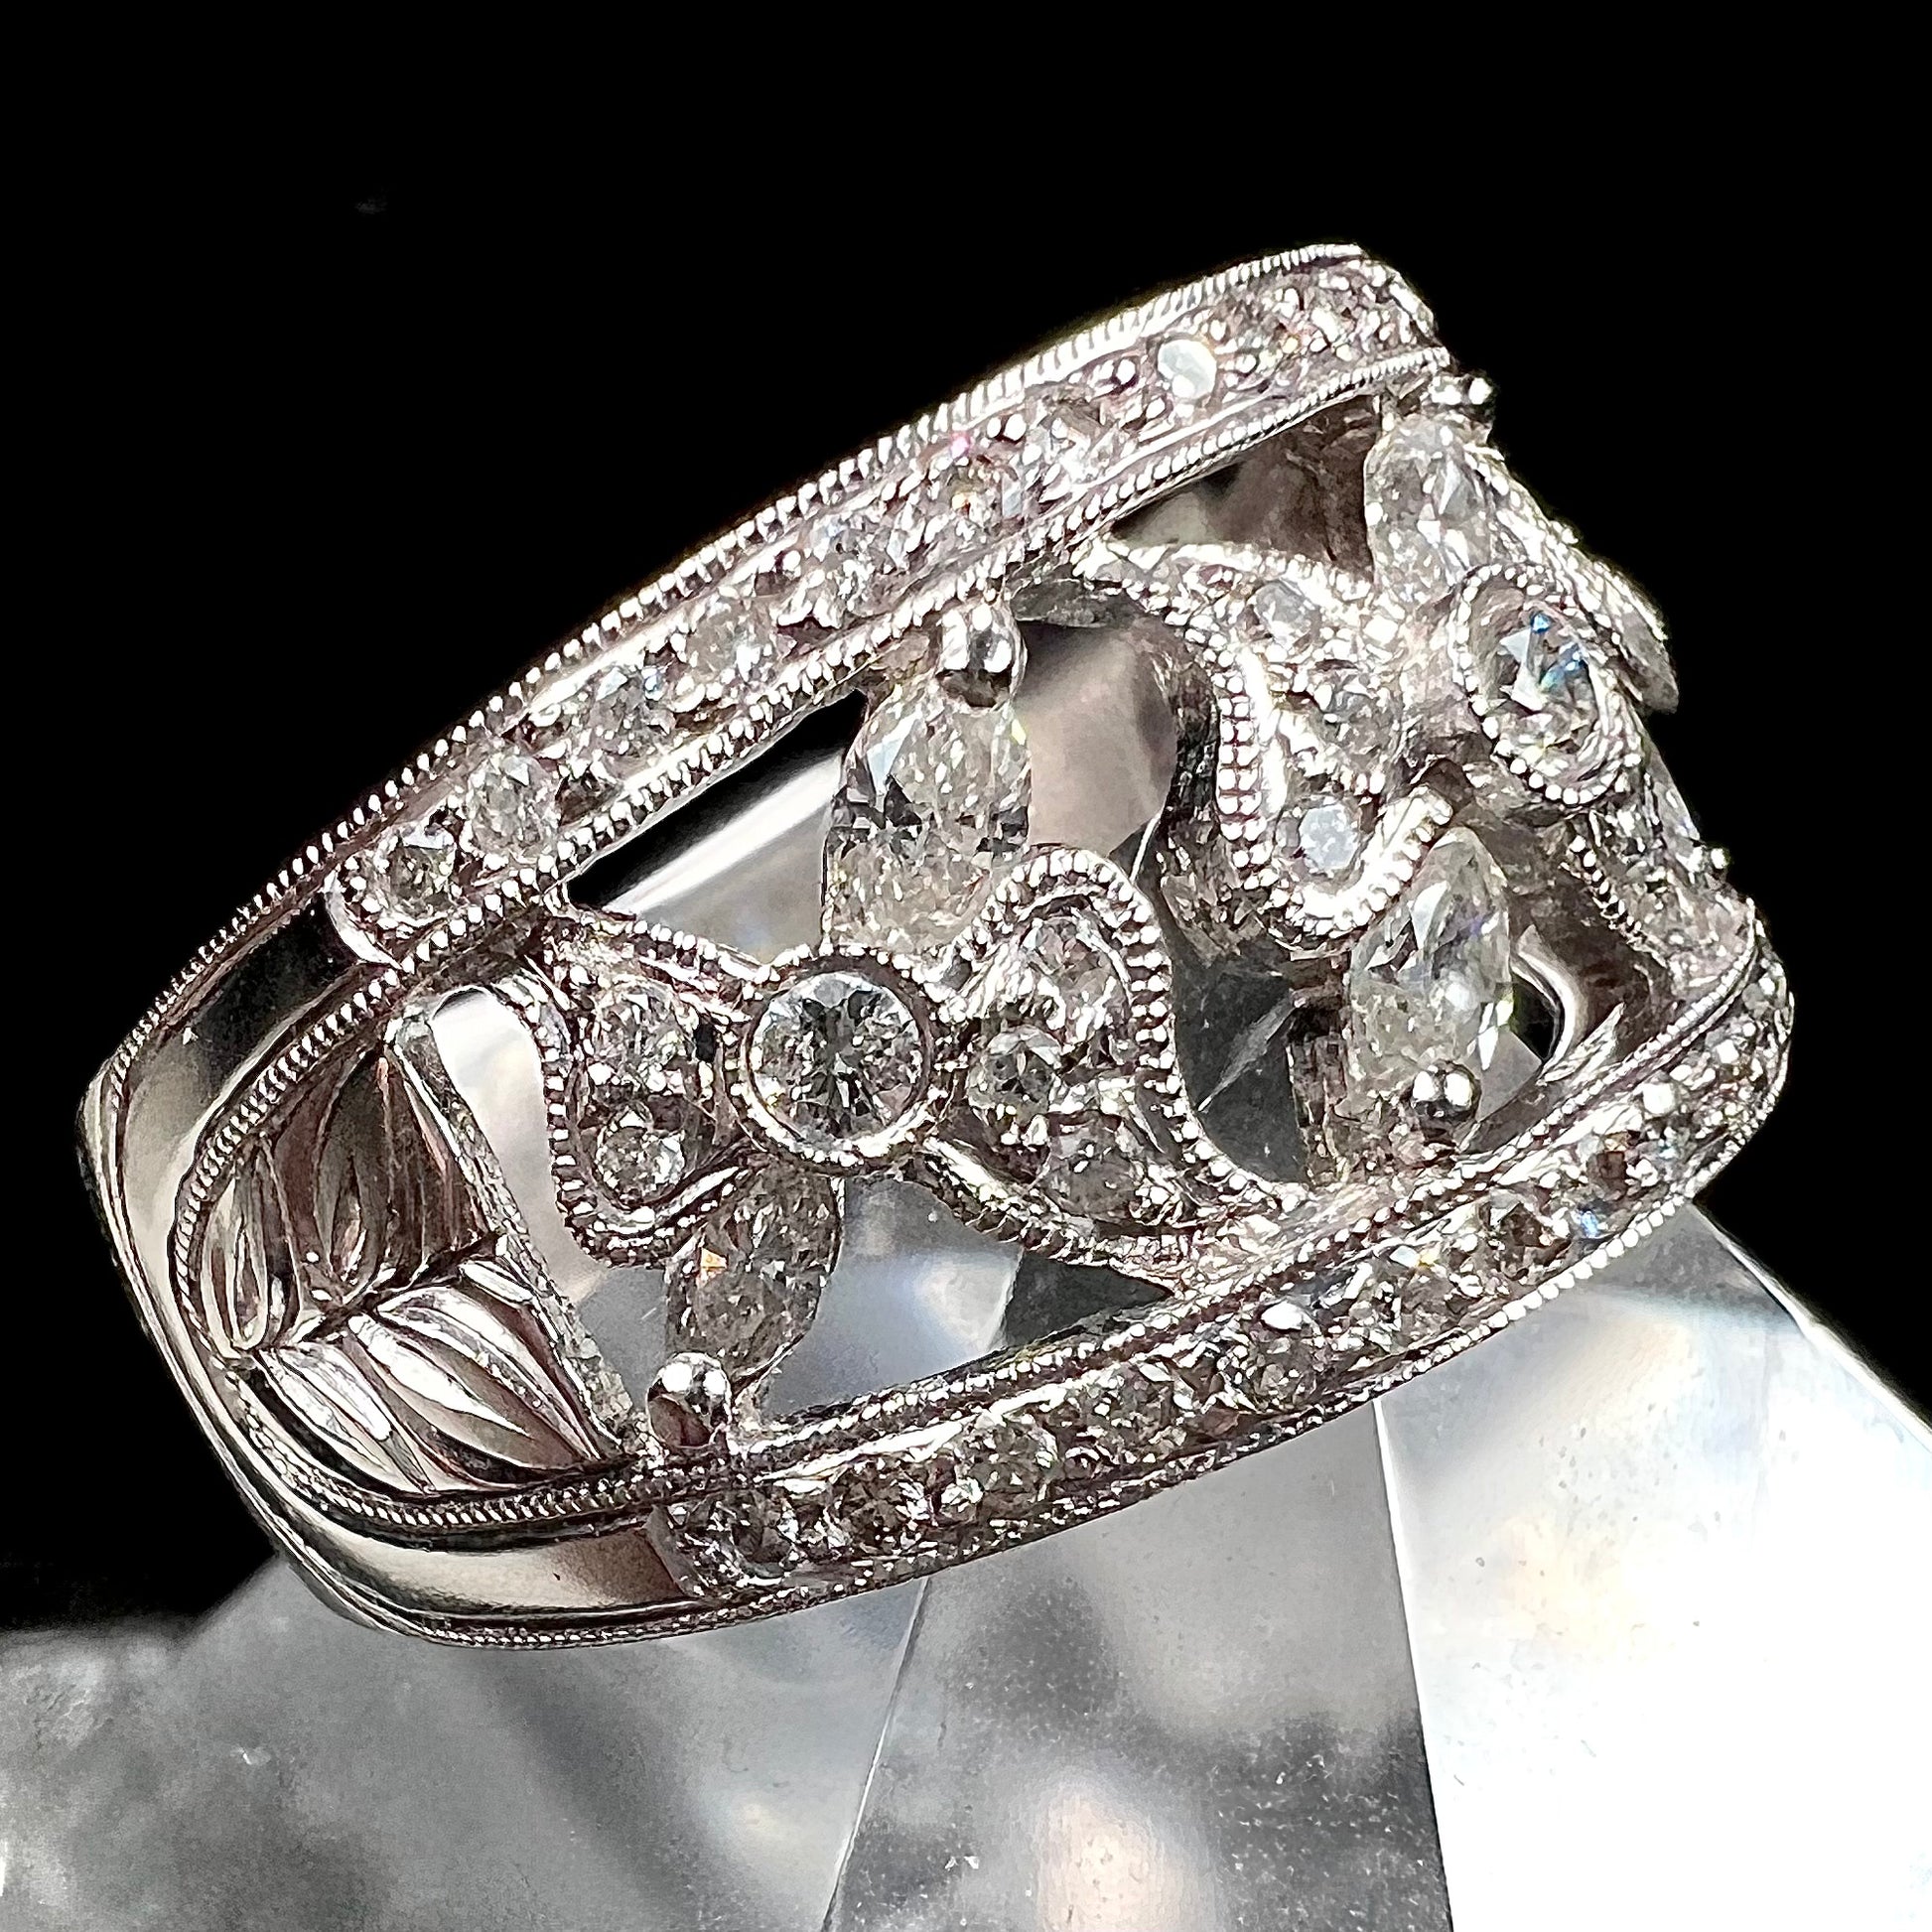 An art nouveau style 18k white gold ring set with round and marquise cut diamonds.